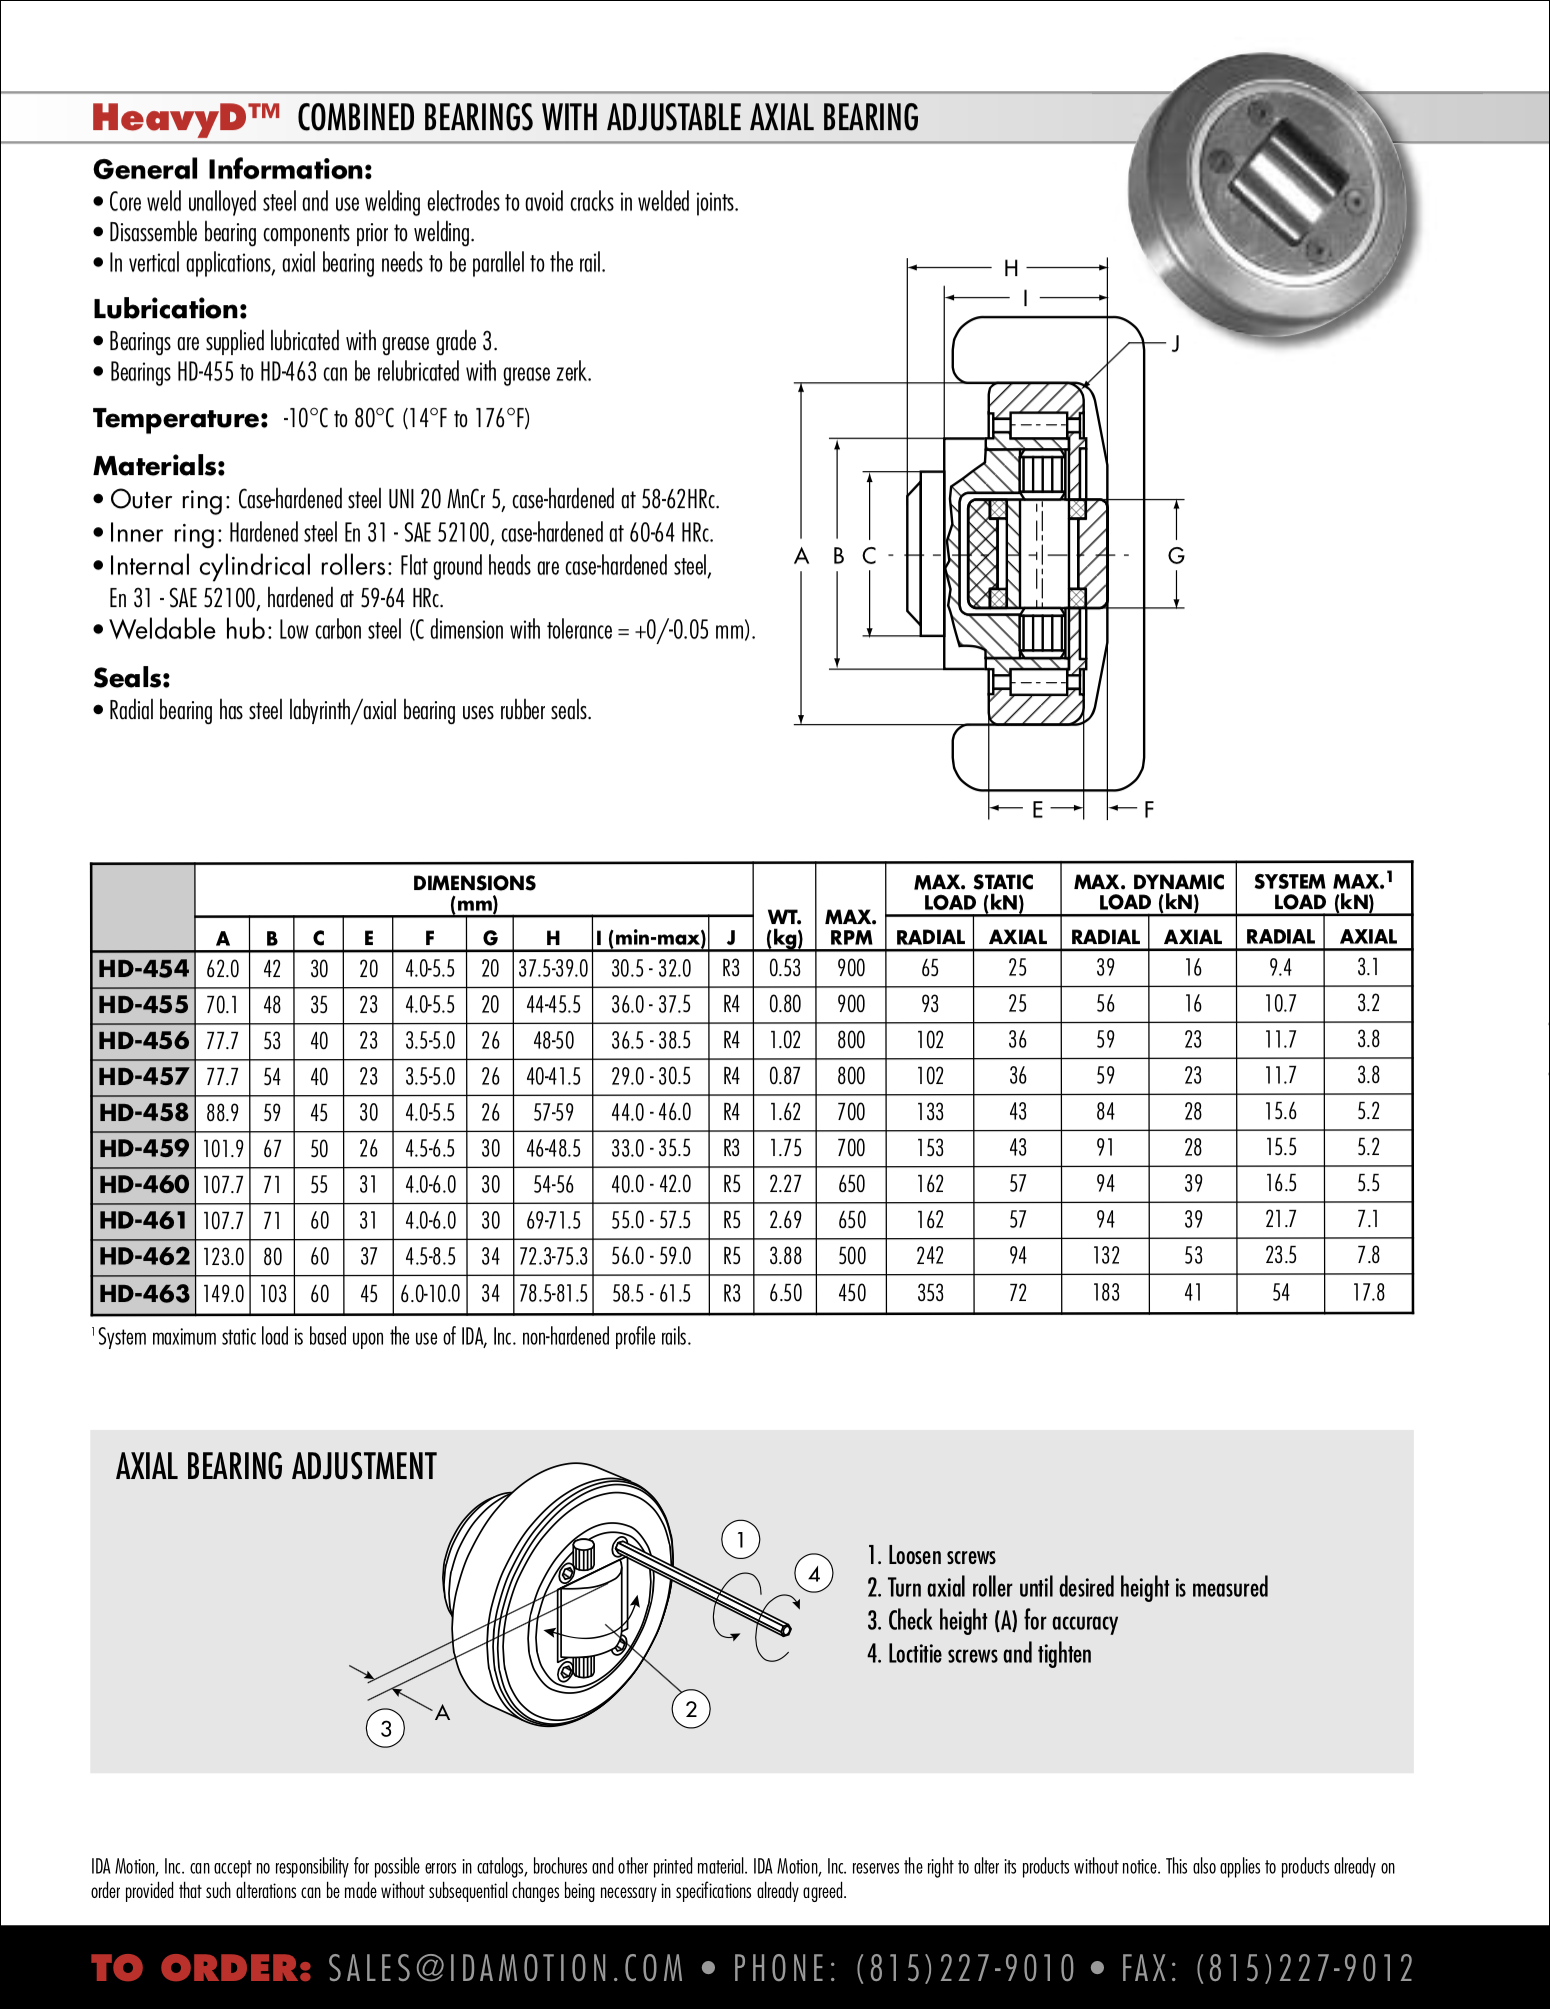 Combined Bearings with Adjustable Axial Roller, Iron Roughneck Bearing